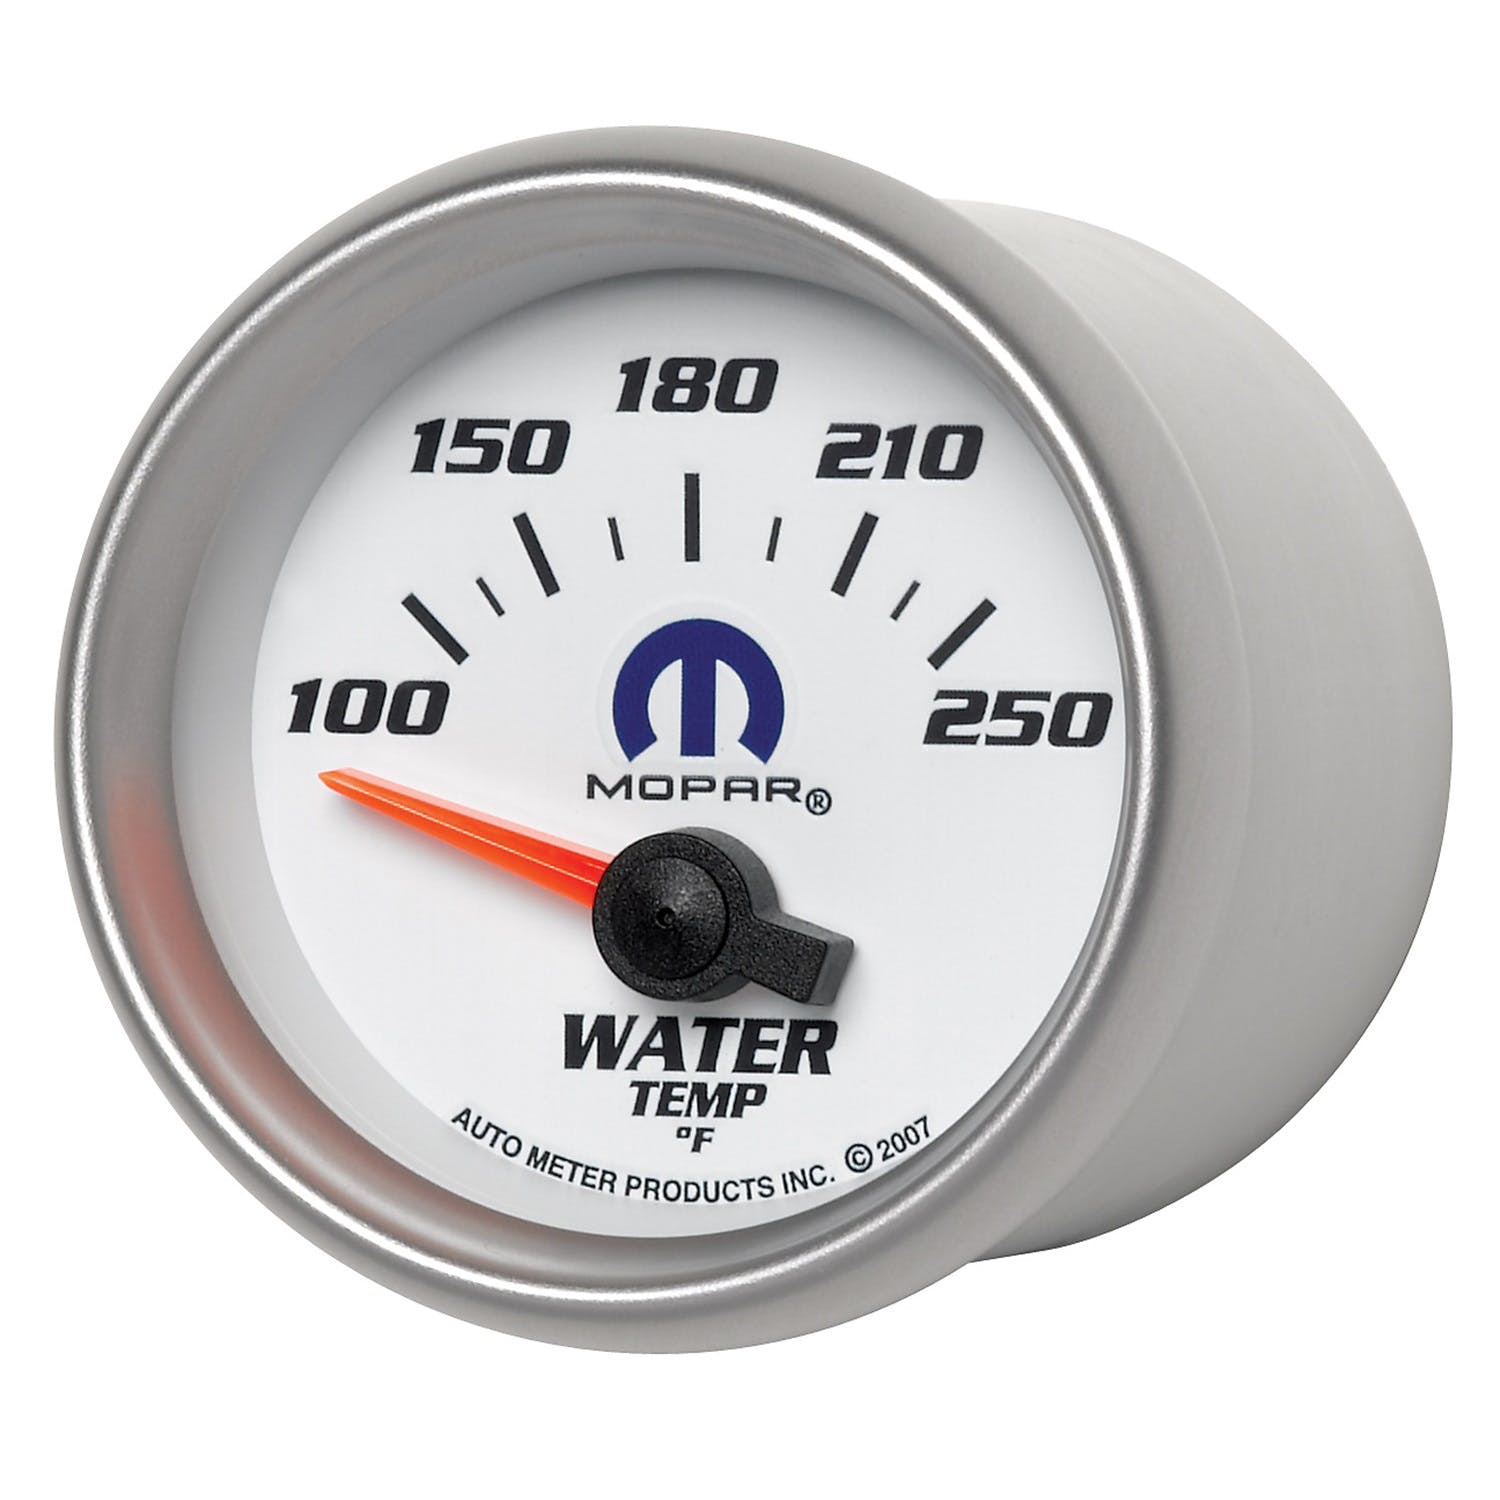 AutoMeter Products 880030 Mopar #77060038, 2-1/16 Water Temp, 100-250F